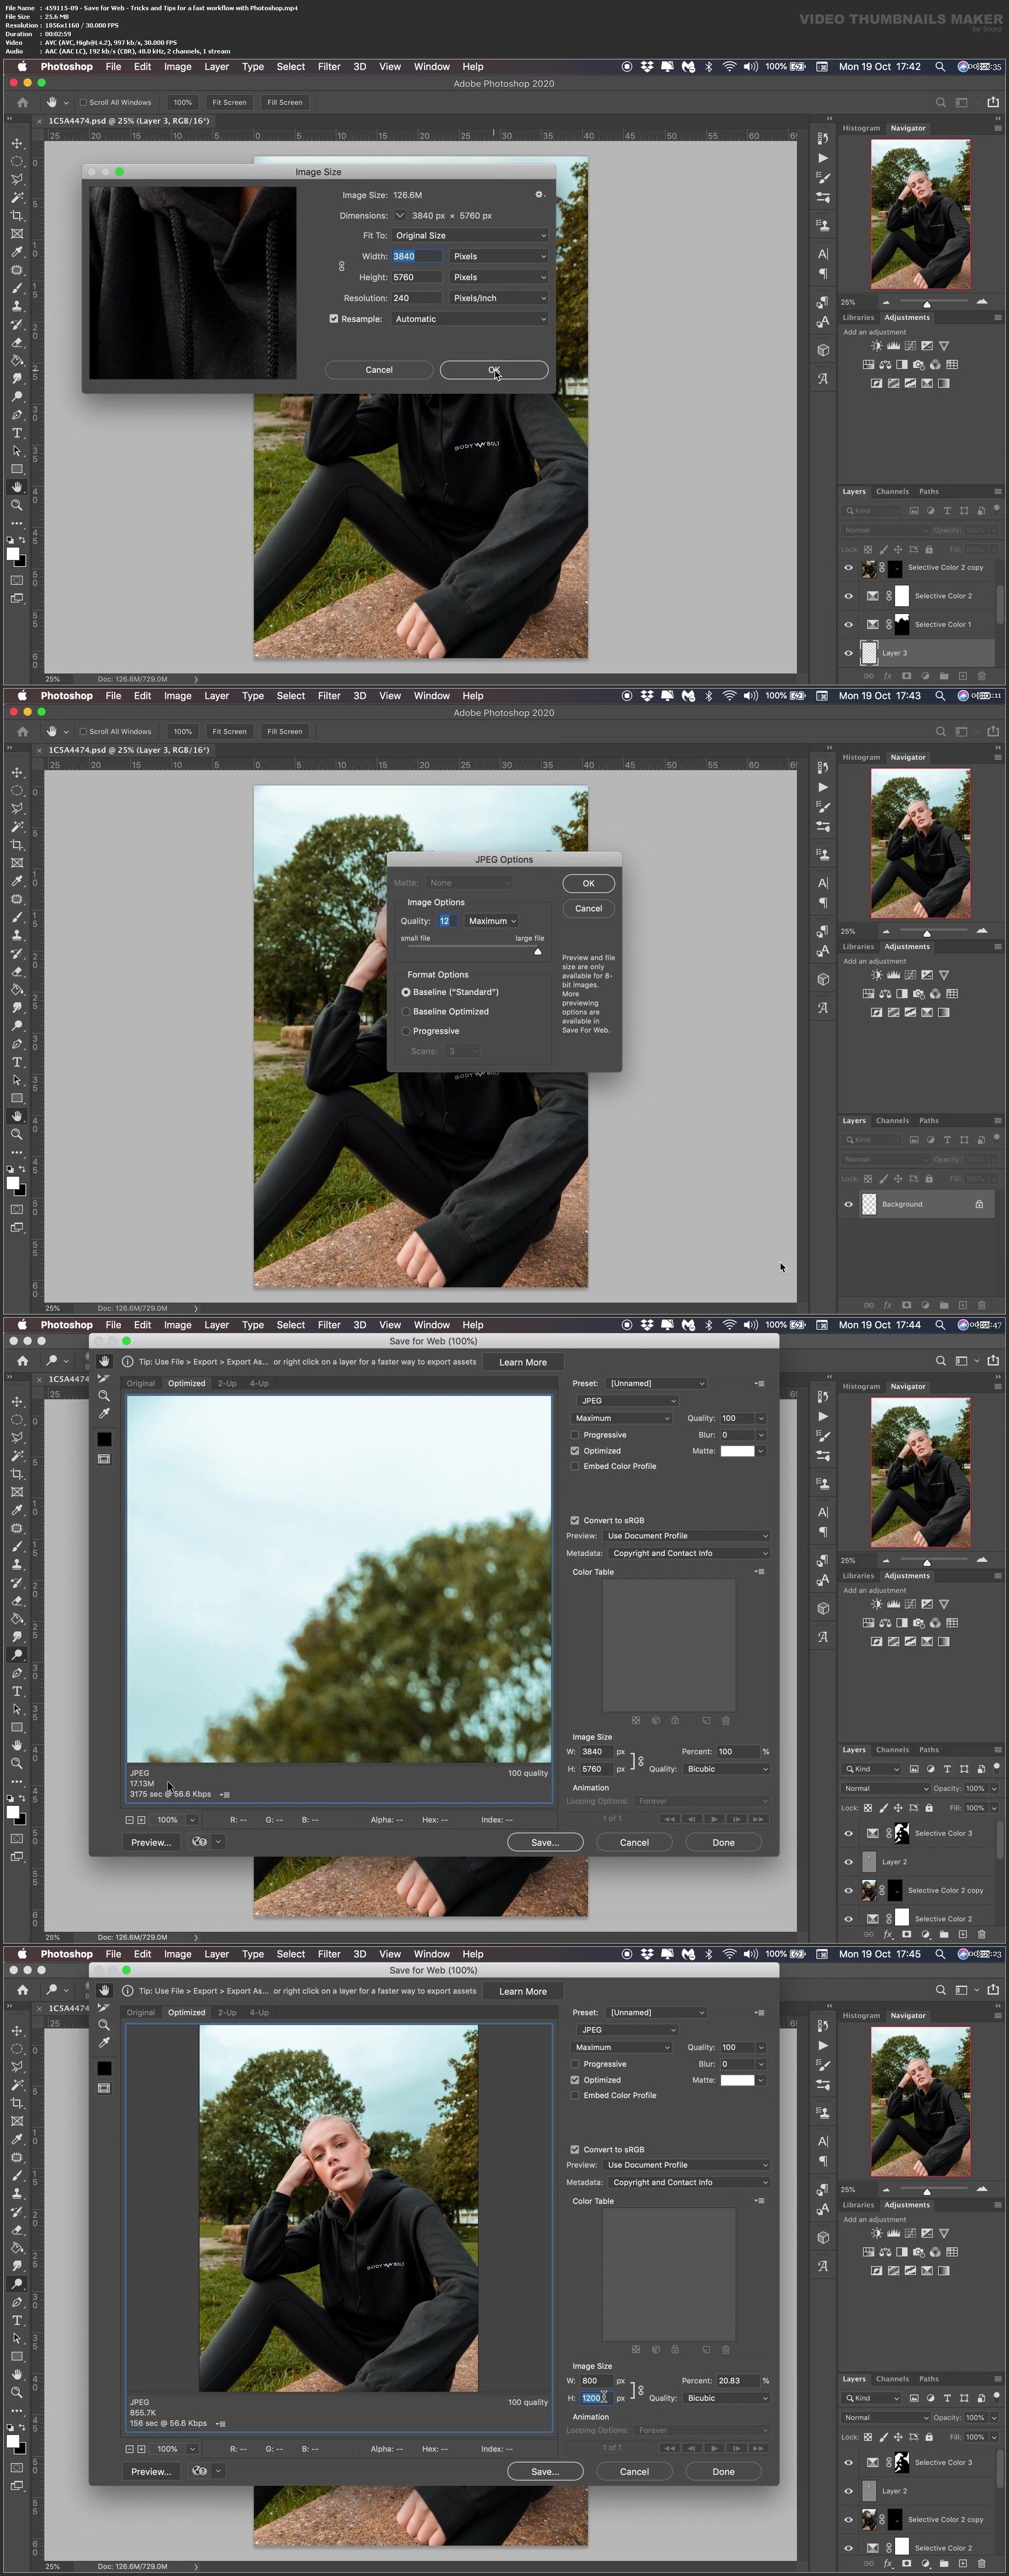 Tricks and Tips for a fast workflow with Photoshop